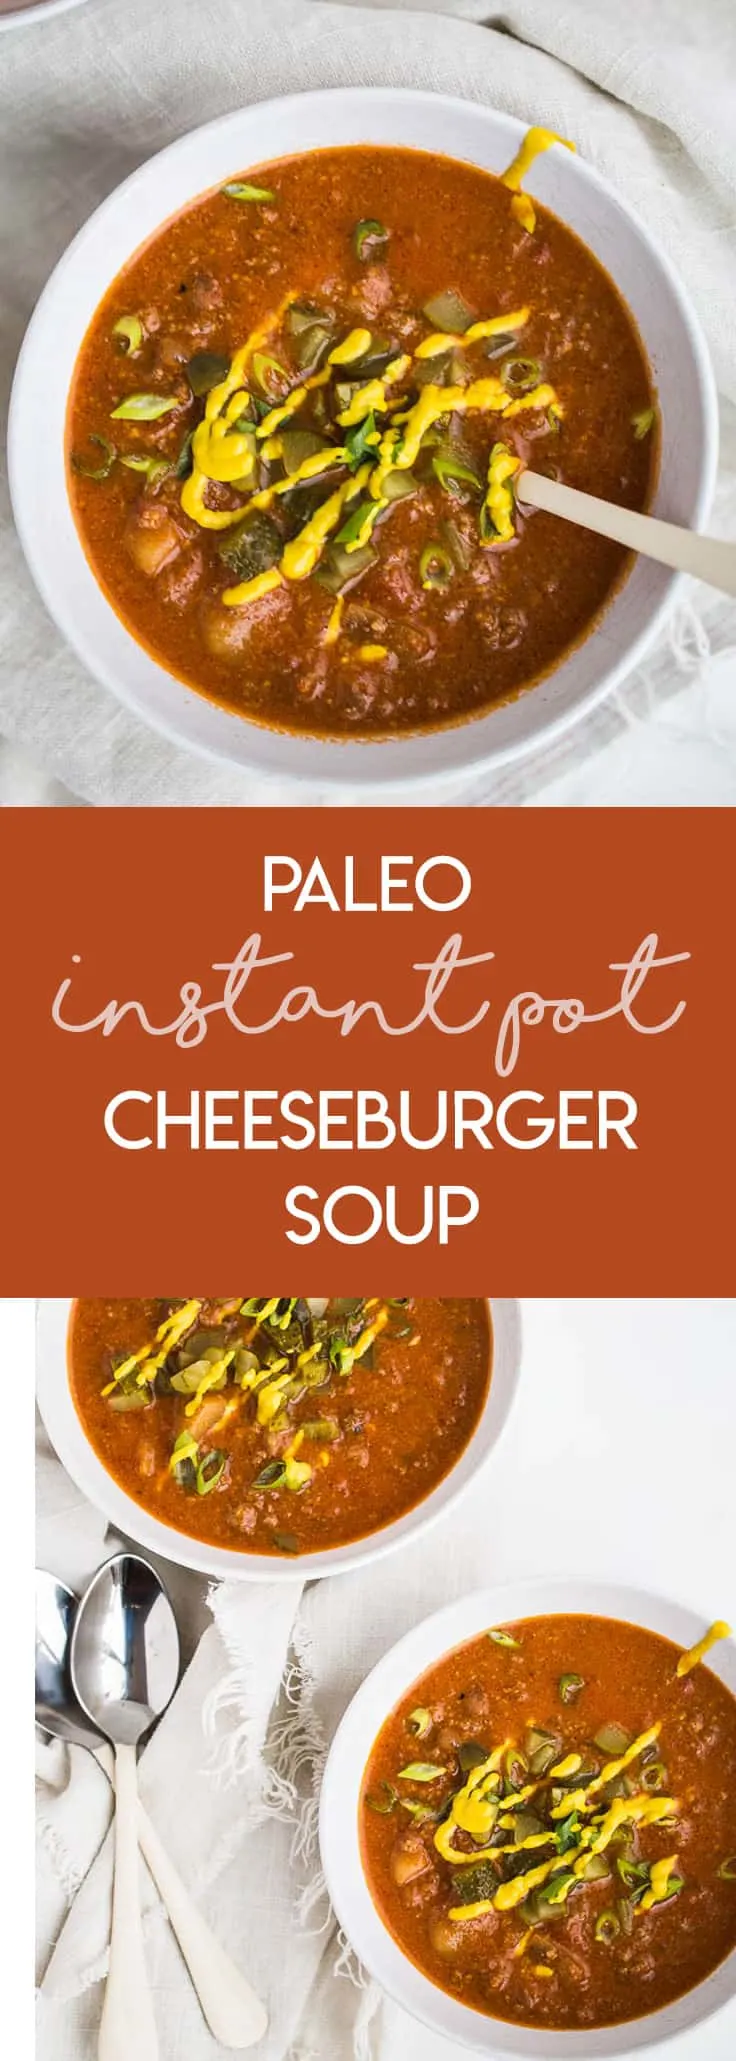 Paleo Instant Pot Cheeseburger Soup | This soup has all of the best flavors from a classic cheeseburger and freezes well! It's also paleo and easily made Whole30 compliant. | Instant Pot recipes | ground beef recipes | soup recipes | perrysplate.com